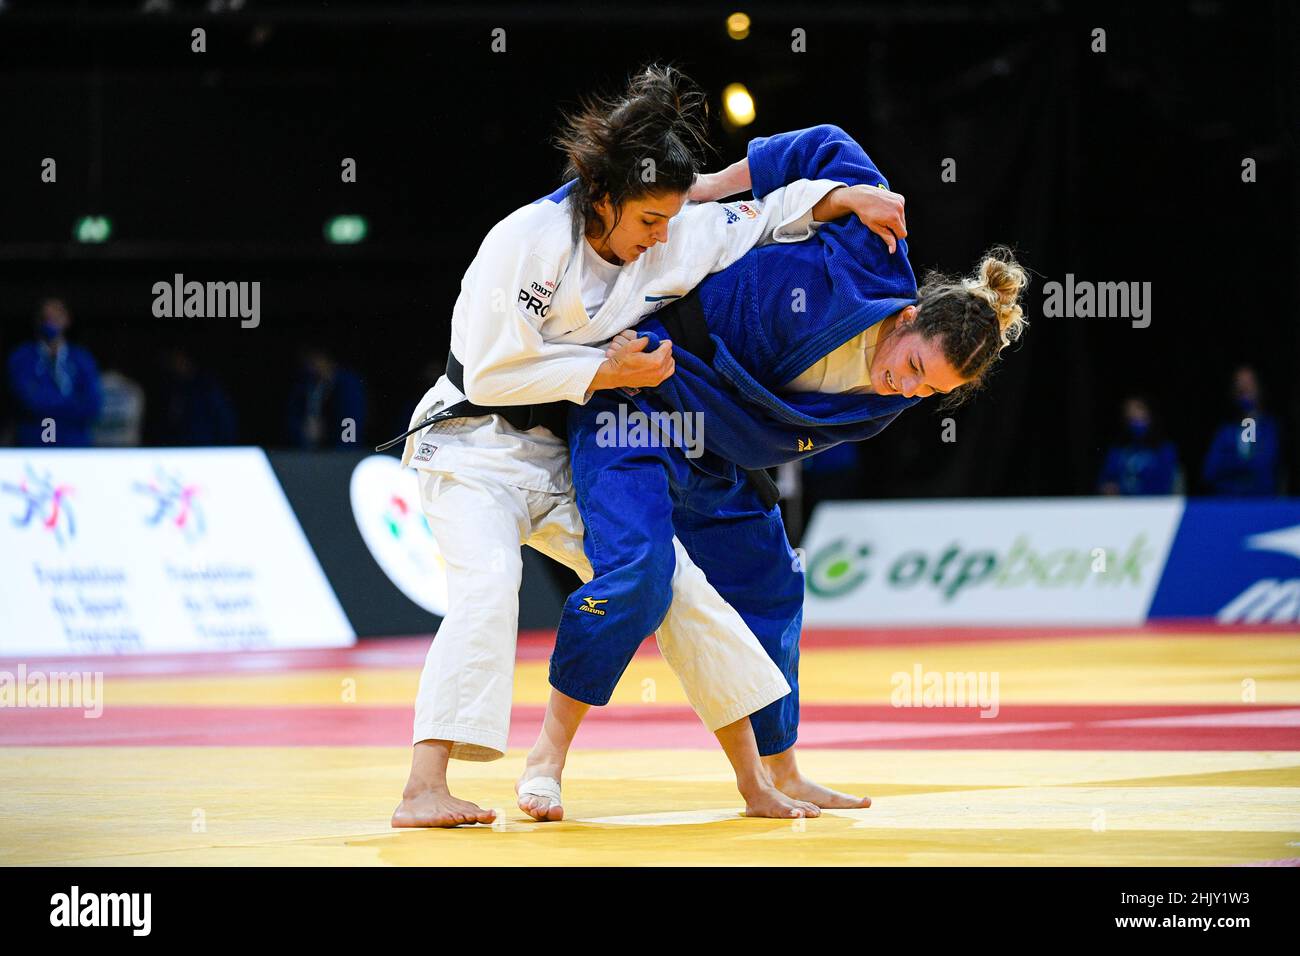 Women -52 kg, Mascha BALLHAUS (blue) of Germany and Gefen PRIMO (white) of Israel compete during the Paris Grand Slam 2021, Judo event on October 16, Stock Photo